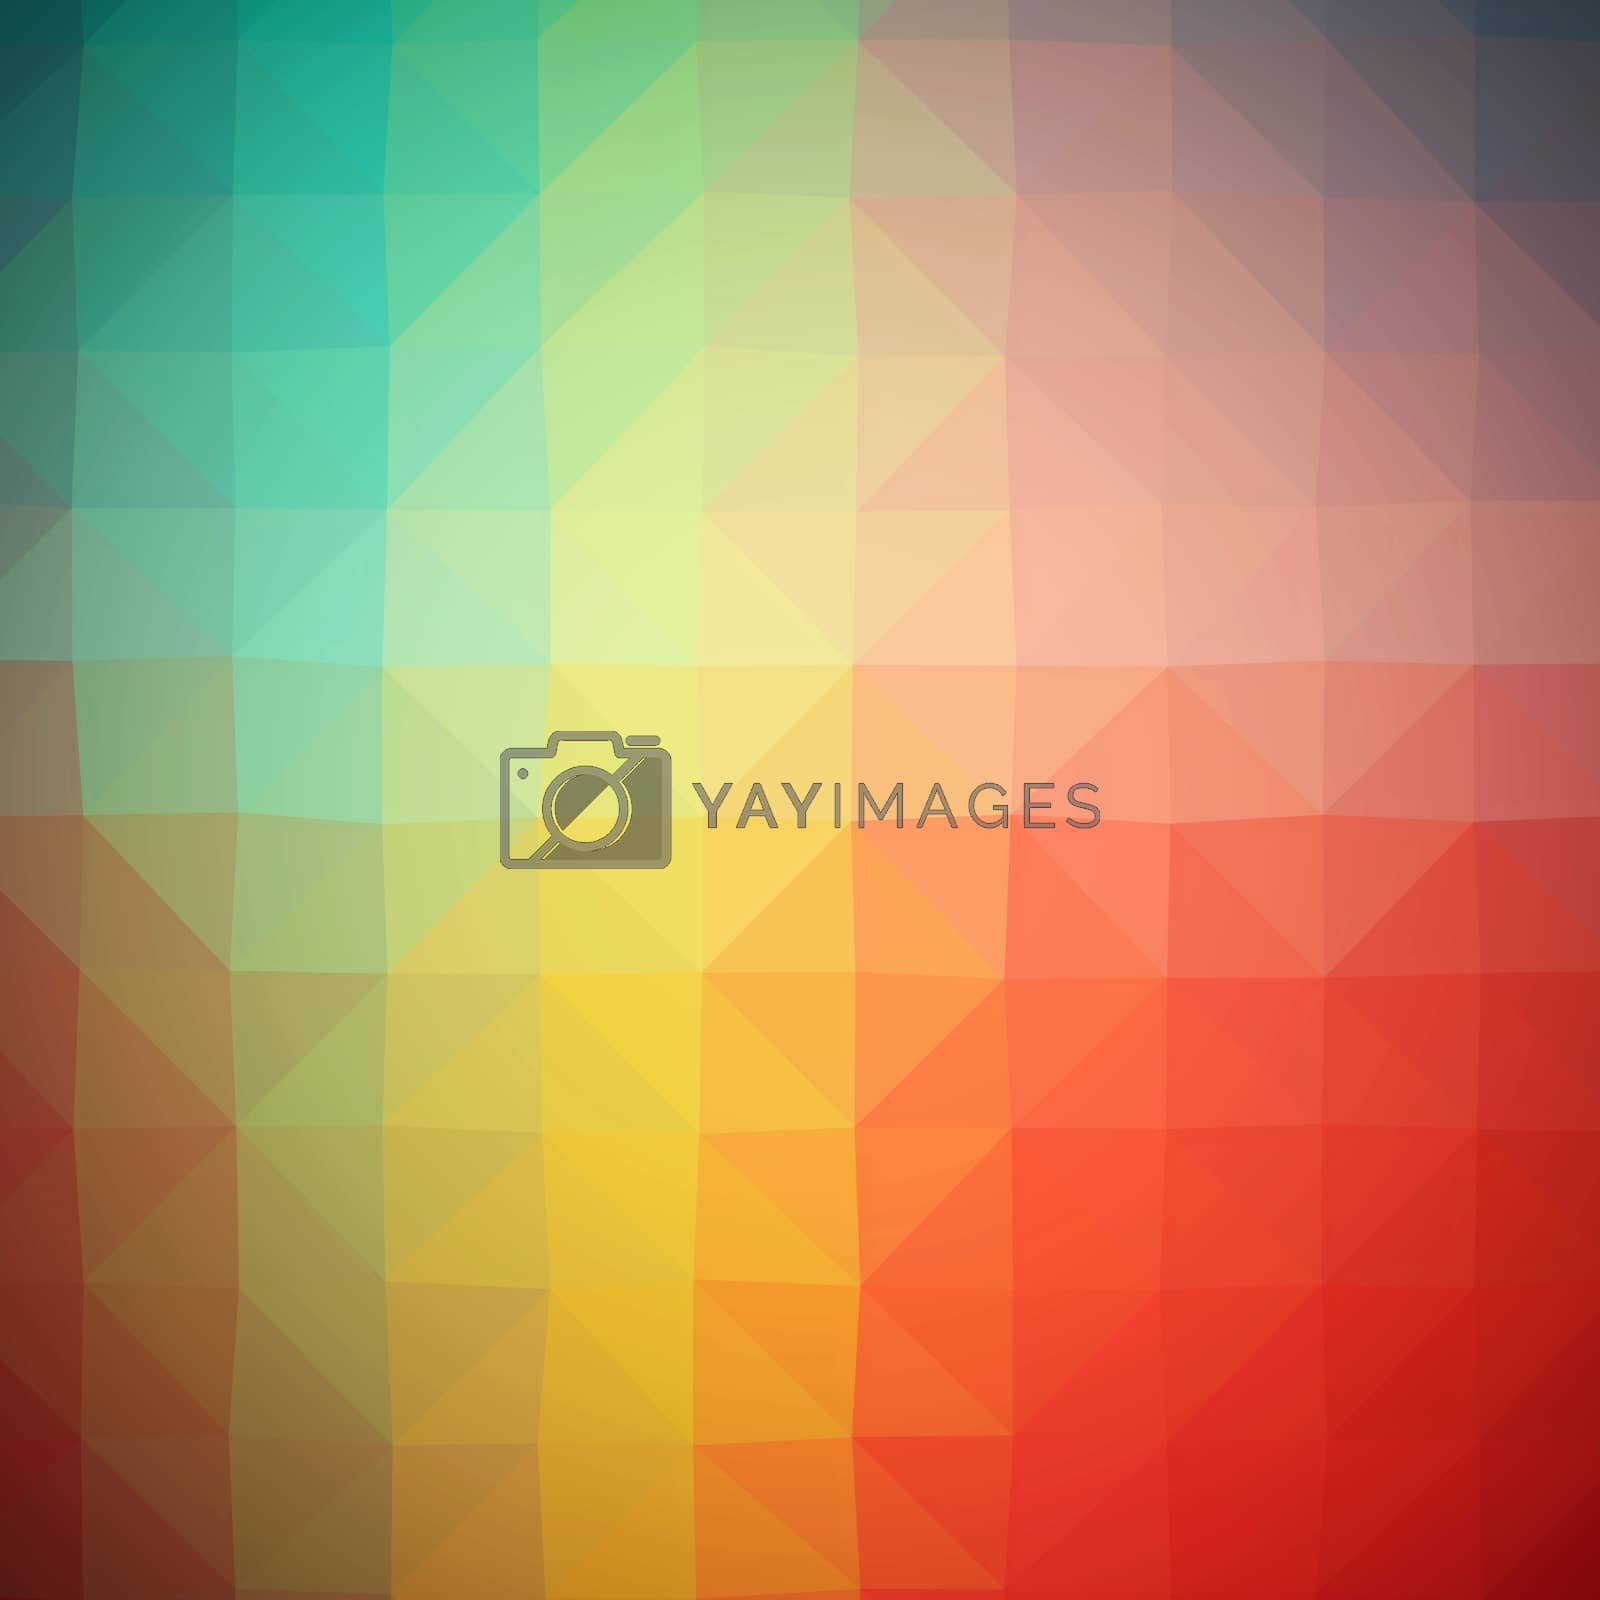 Royalty free image of Triangle pattern by hamik